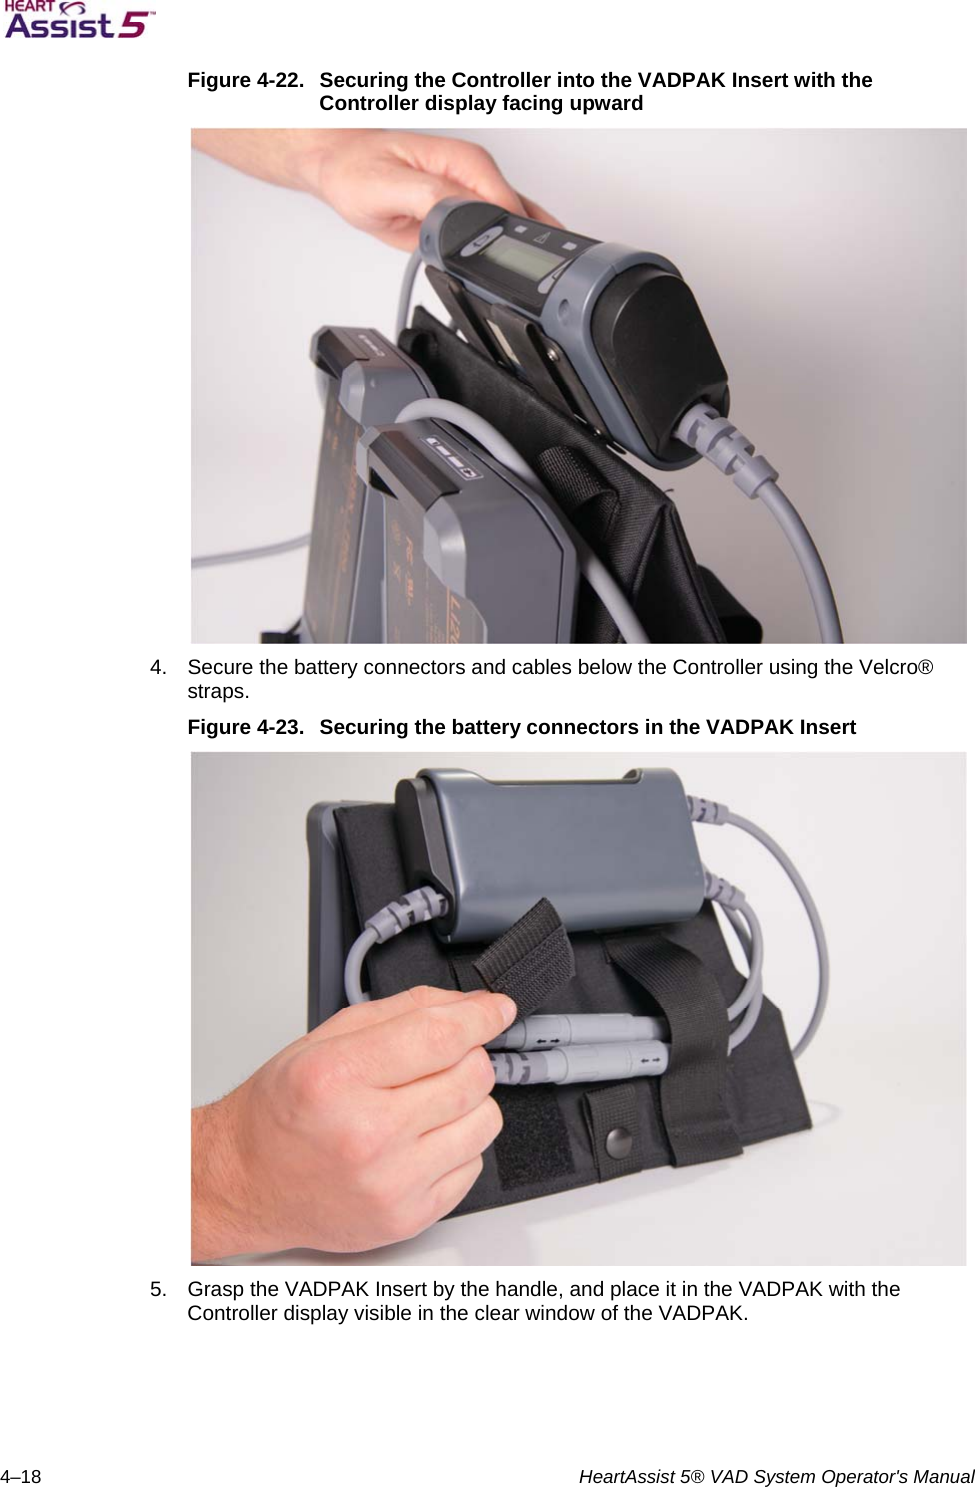   4–18  HeartAssist 5® VAD System Operator&apos;s Manual Figure 4-22.  Securing the Controller into the VADPAK Insert with the Controller display facing upward  4.  Secure the battery connectors and cables below the Controller using the Velcro® straps. Figure 4-23.  Securing the battery connectors in the VADPAK Insert  5.  Grasp the VADPAK Insert by the handle, and place it in the VADPAK with the Controller display visible in the clear window of the VADPAK. 